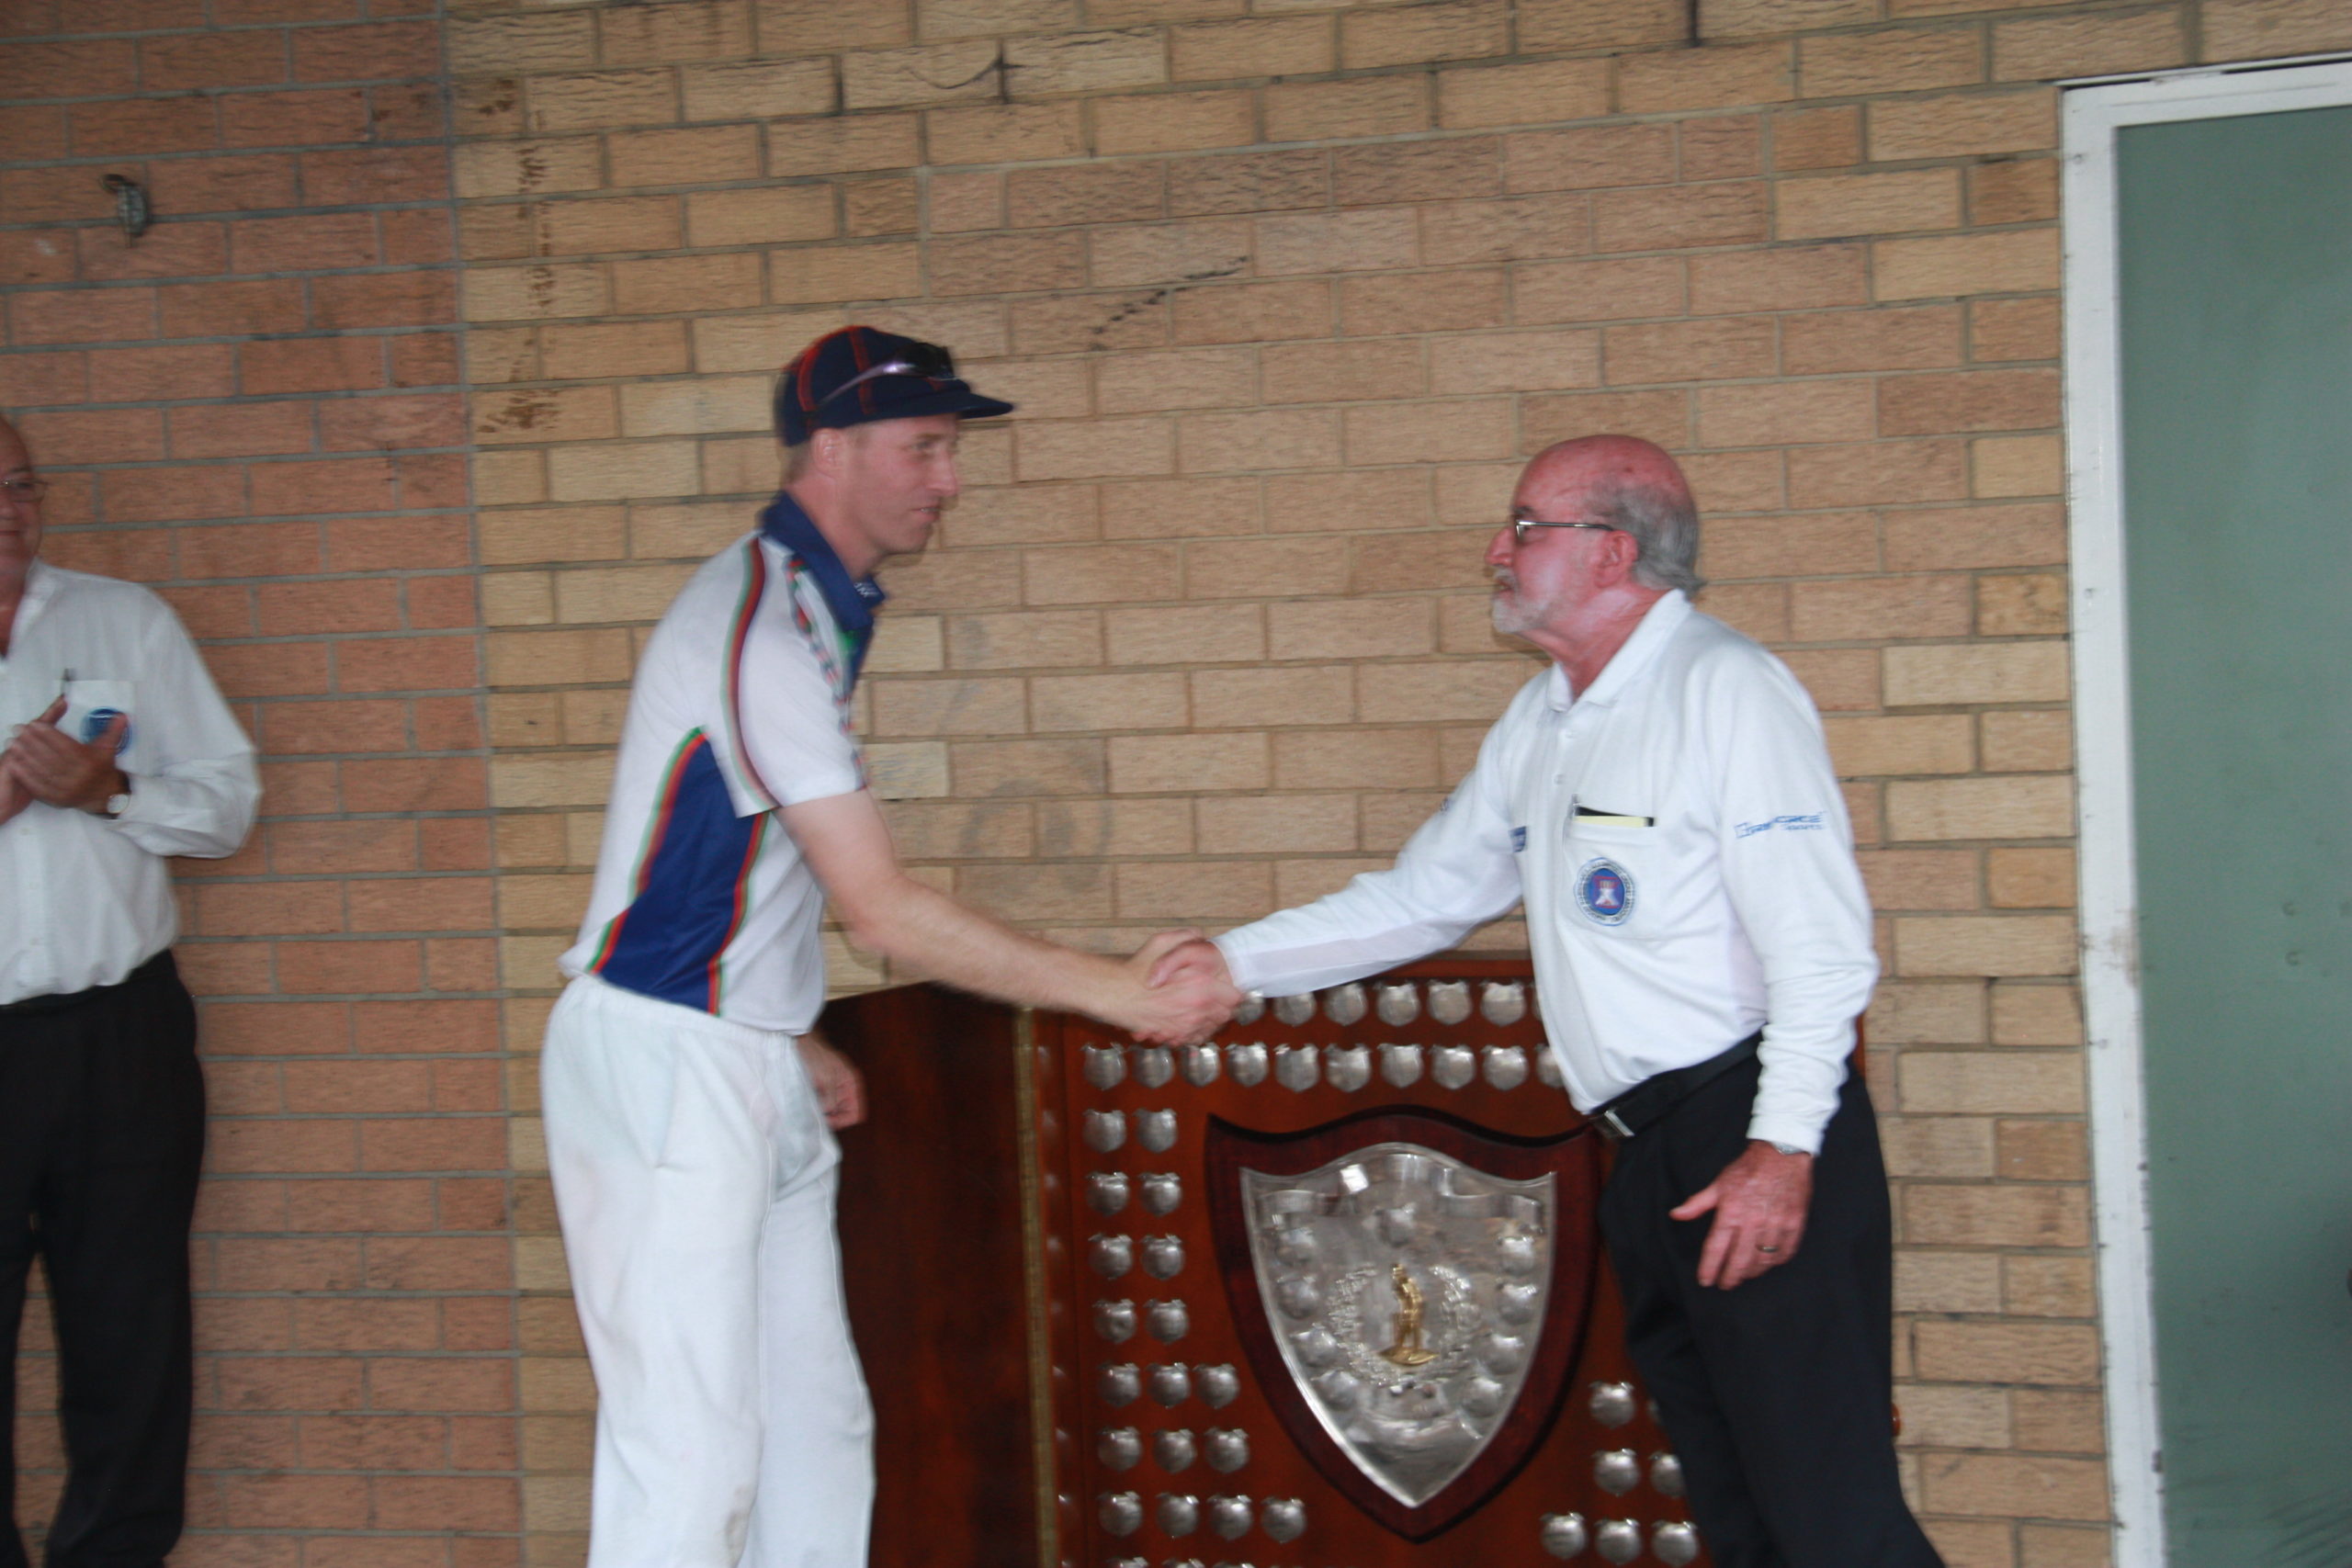 James Makin with Geoff Hasler (Umpire) - A1 Grand Final (Rofie 3) Vs ARL @ Parklands Oval 29 & 30 March 2014